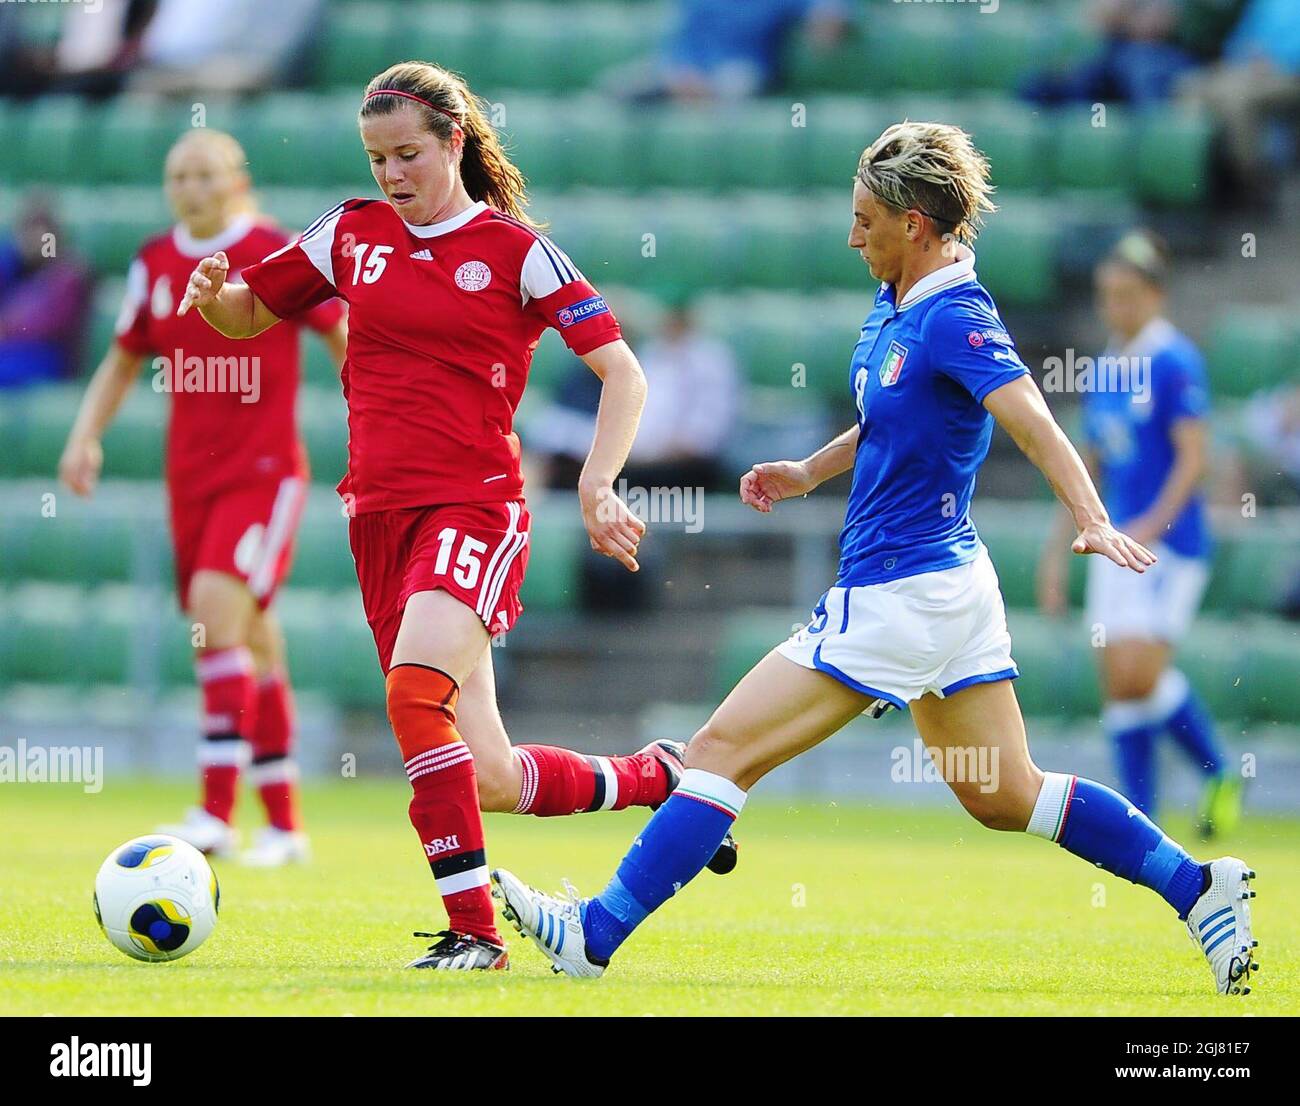 HALMSTAD 2013-07-13 Denmark's Sofie Pedersen, left, fights for the ball with Italy's Melania Gabbiadini during the UEFA Women's EURO 2013 group A soccer match between Denmark and Italy at Orjans vall in Halmstad, Sweden, on July 13, 2013. Photo: Bjorn Lindgren / SCANPIX / code 9204  Stock Photo